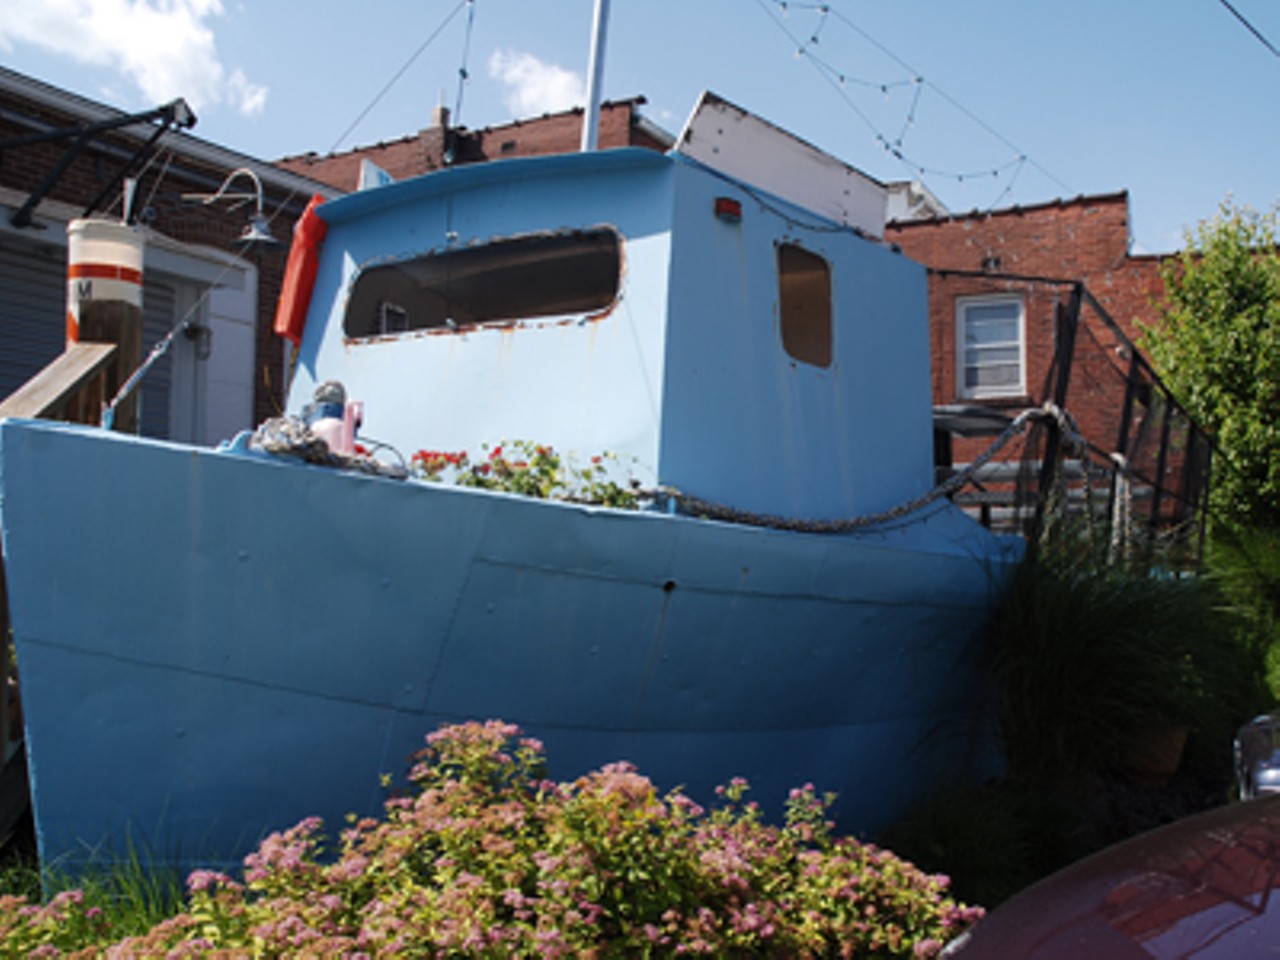 Out behind the Maya Caf&eacute;, guests can eat on the deck of a 1944 model fishing boat that was used as recently as 2000.